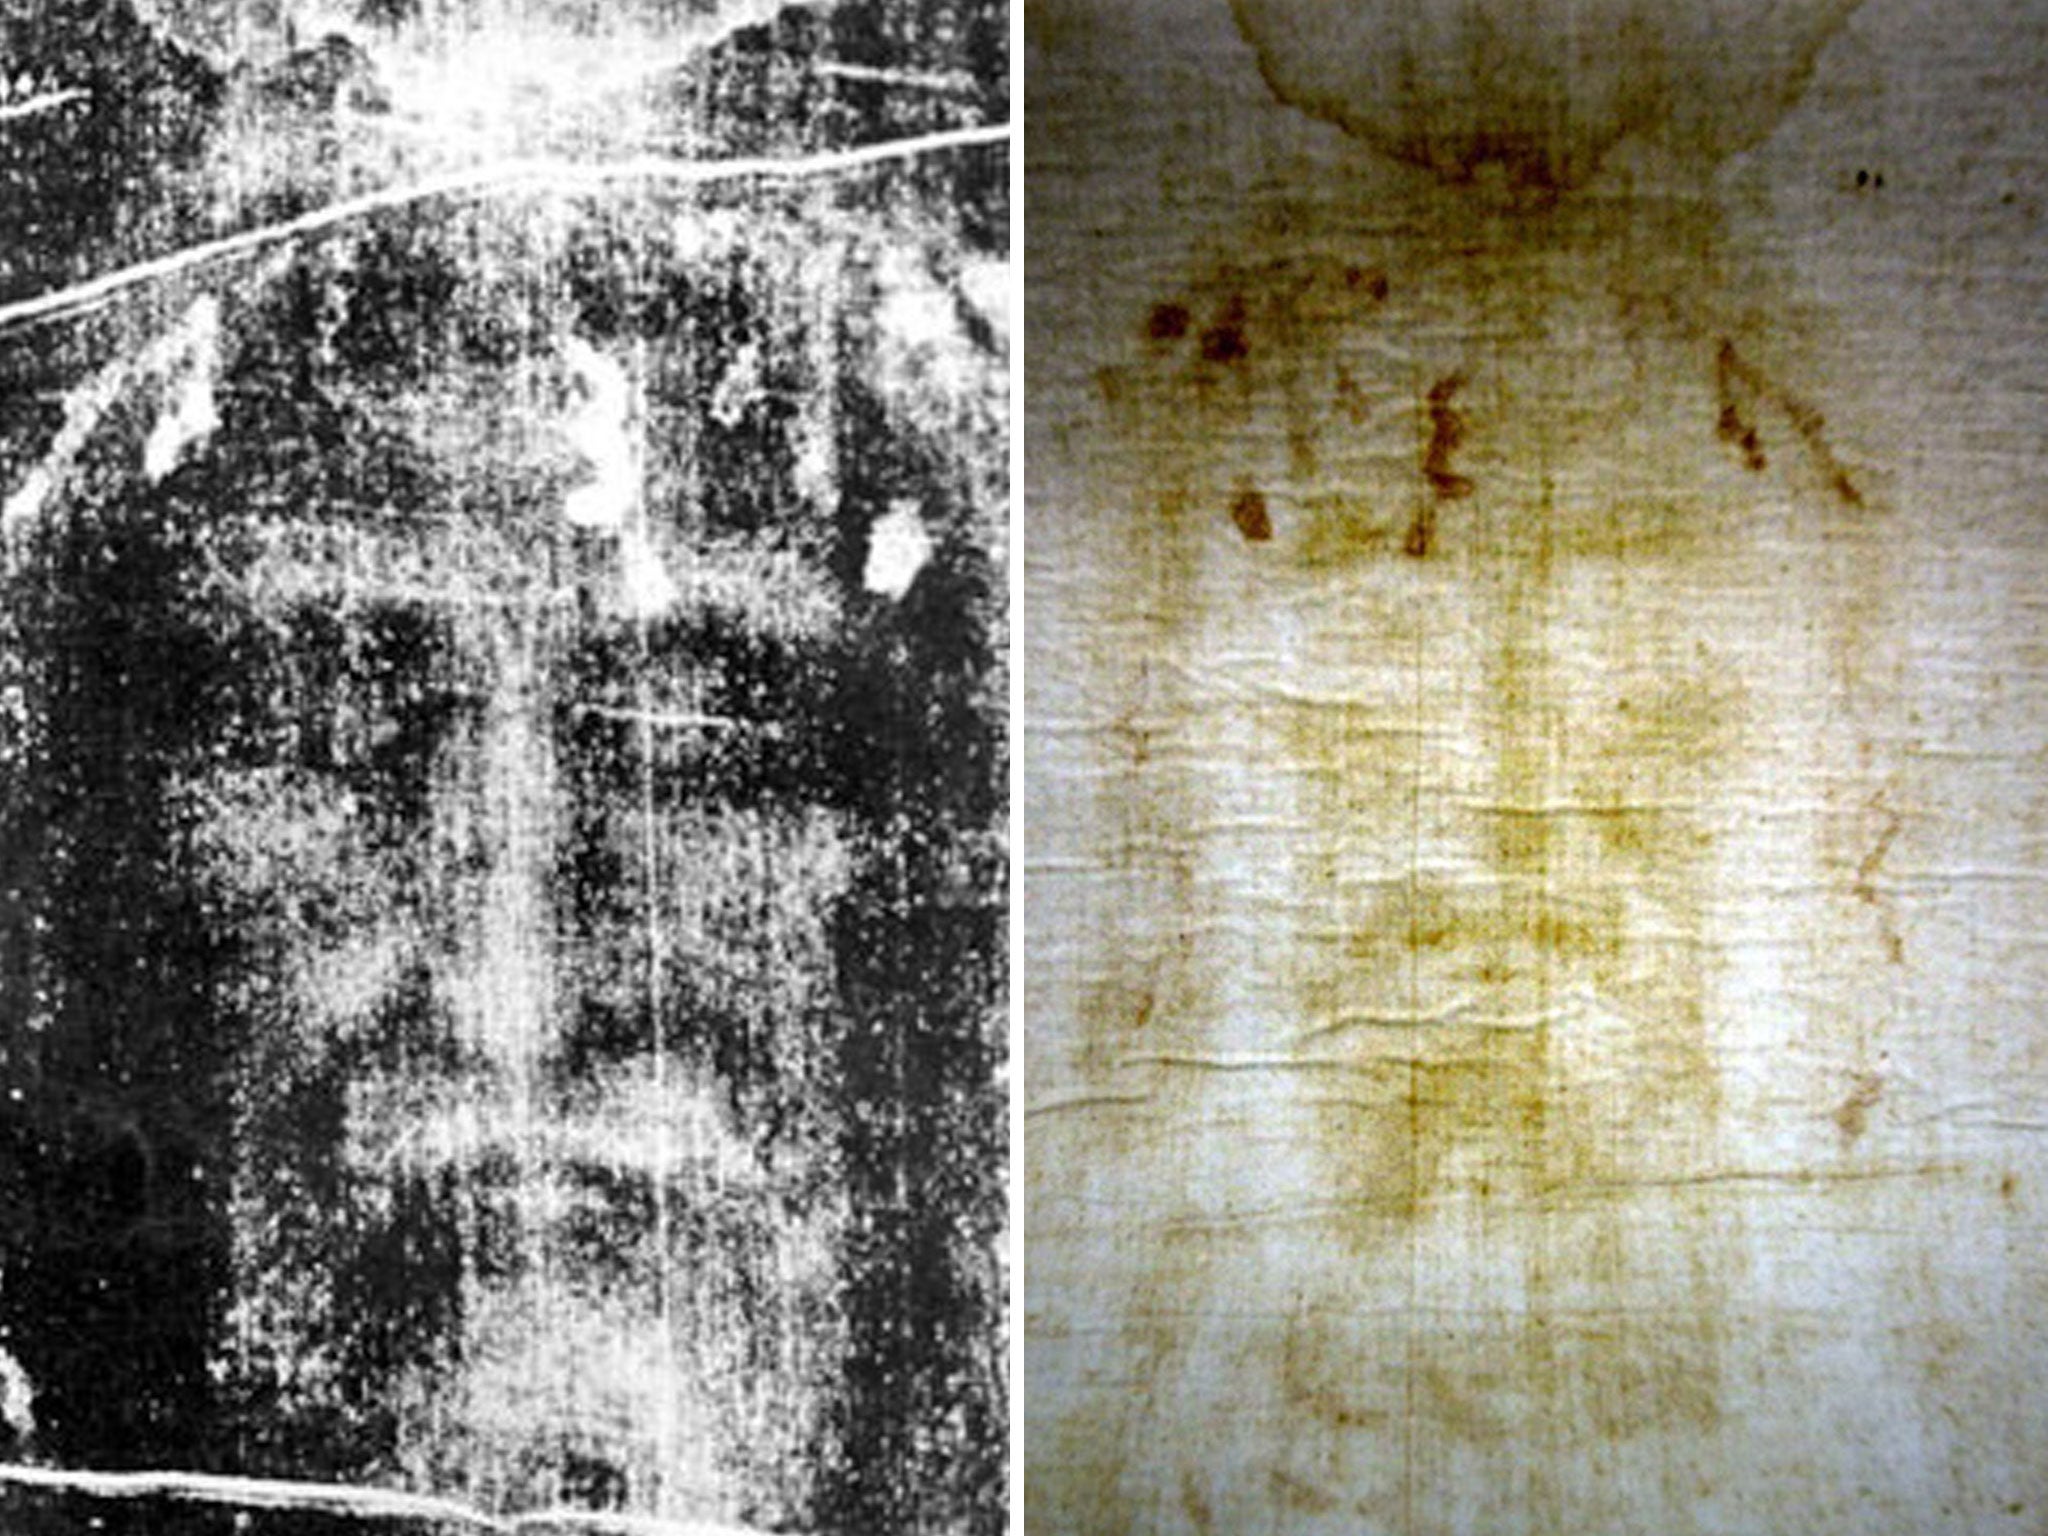 Christianity's most famous relic, the Shroud of Turin, is to go back on display to the public